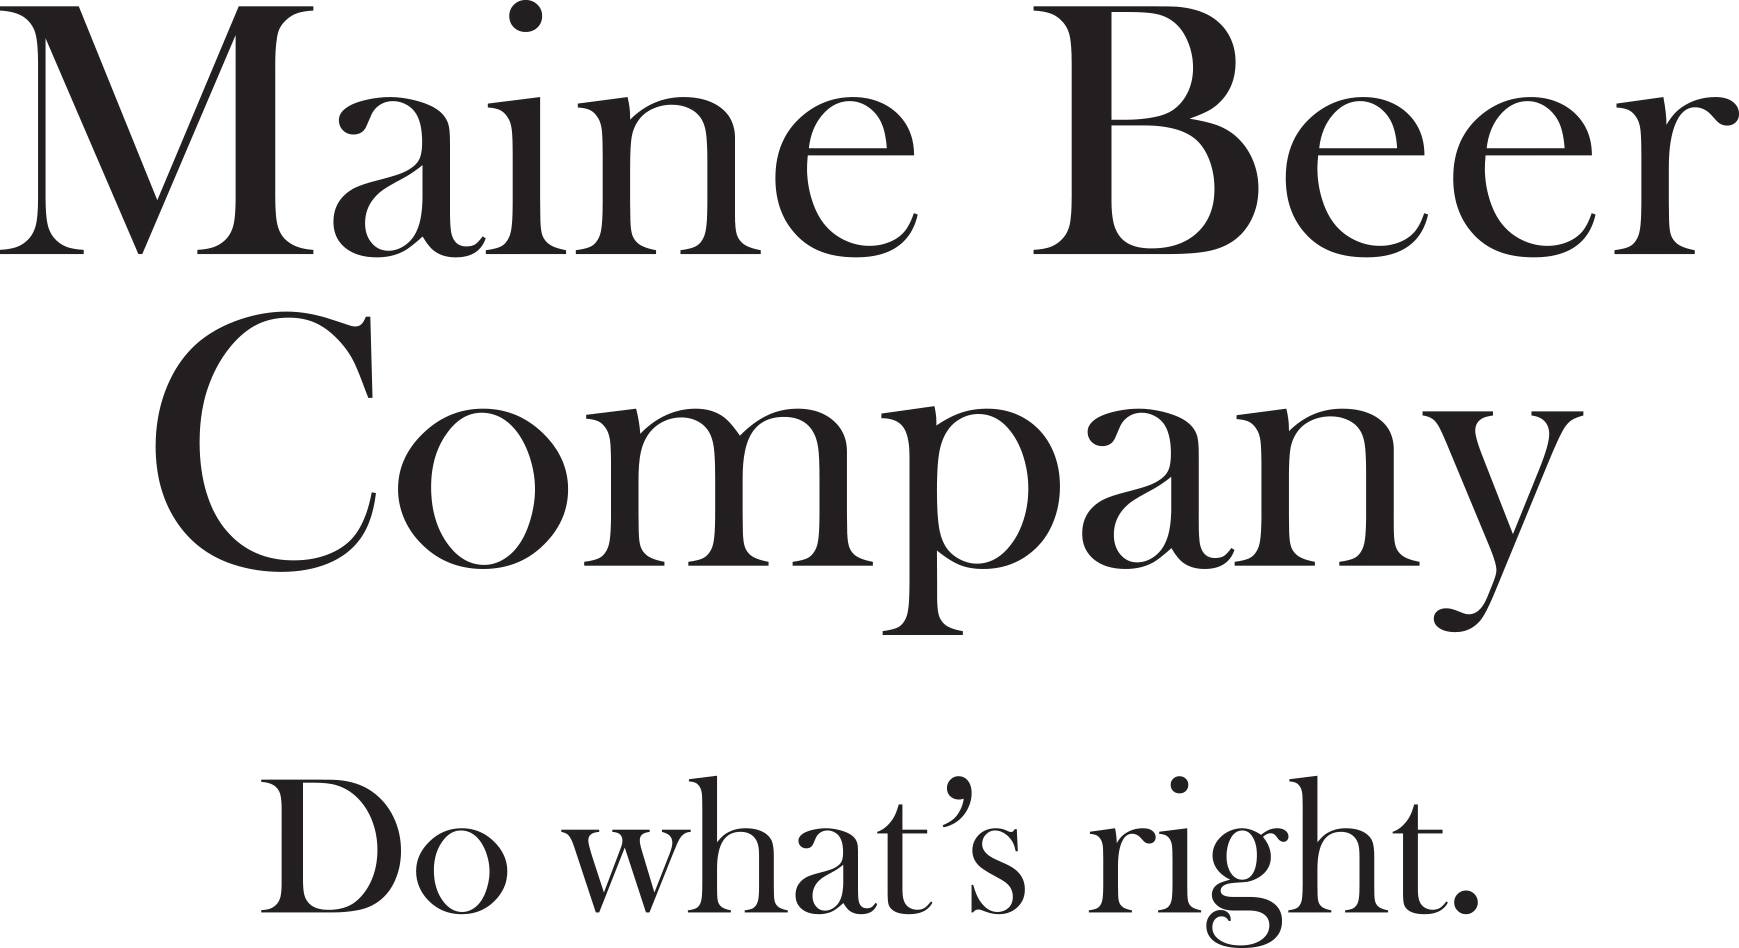 The Maine Beer Company Logo and tagline